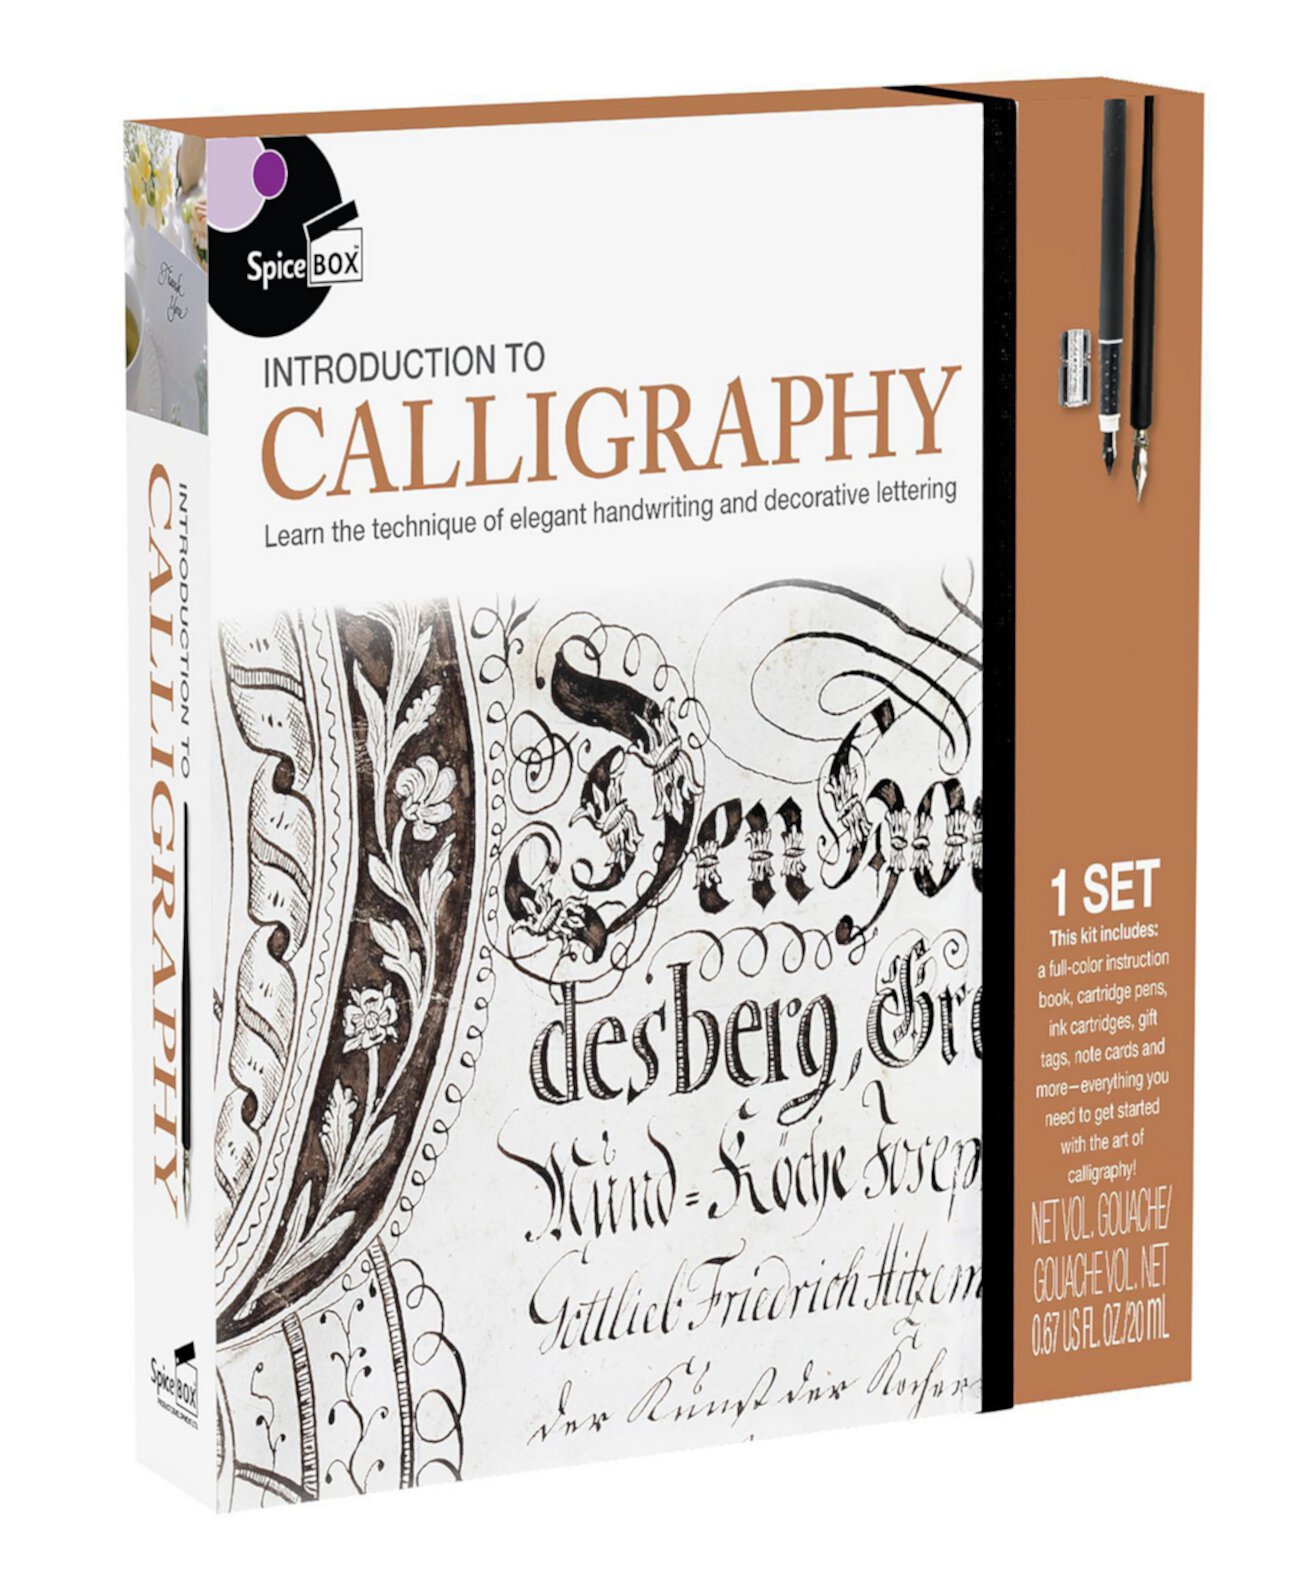 Introduction to - Calligraphy Art Kit Spicebox